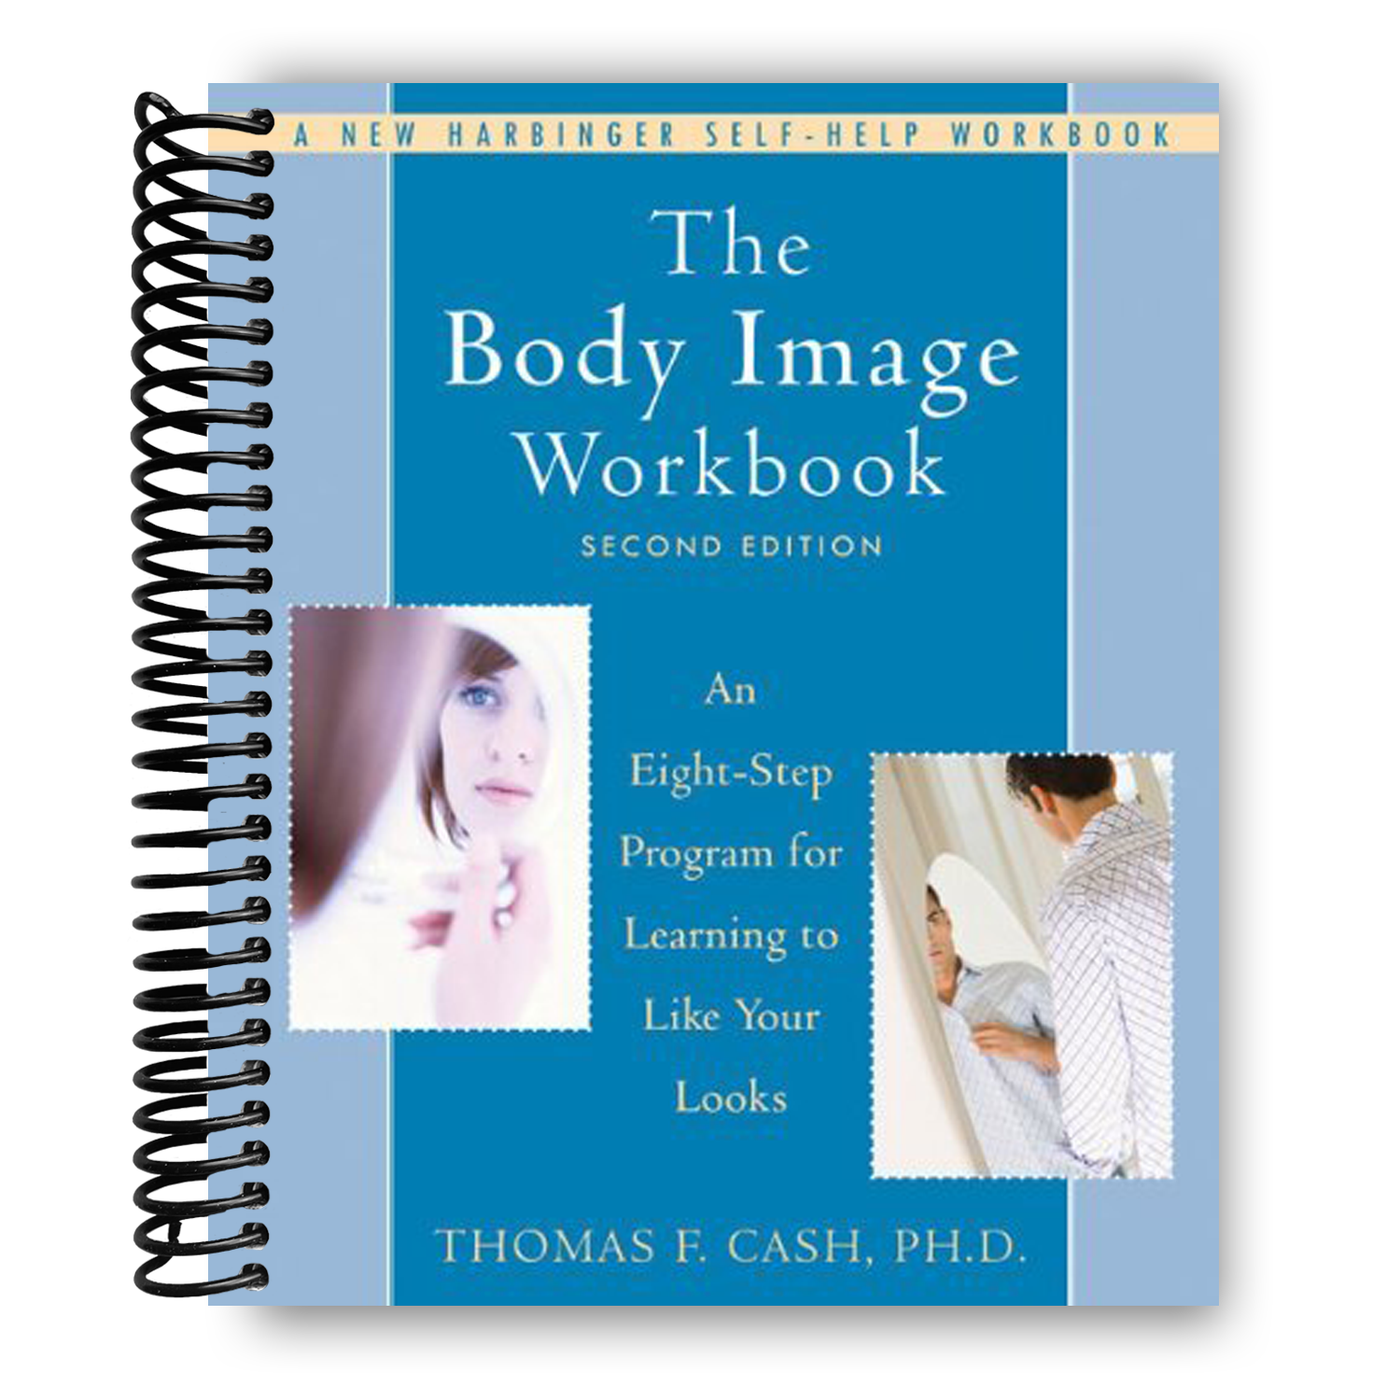 The Body Image Workbook: An Eight-Step Program for Learning to Like Your Looks (A New Harbinger Self-Help Workbook)(Spiral Bound)